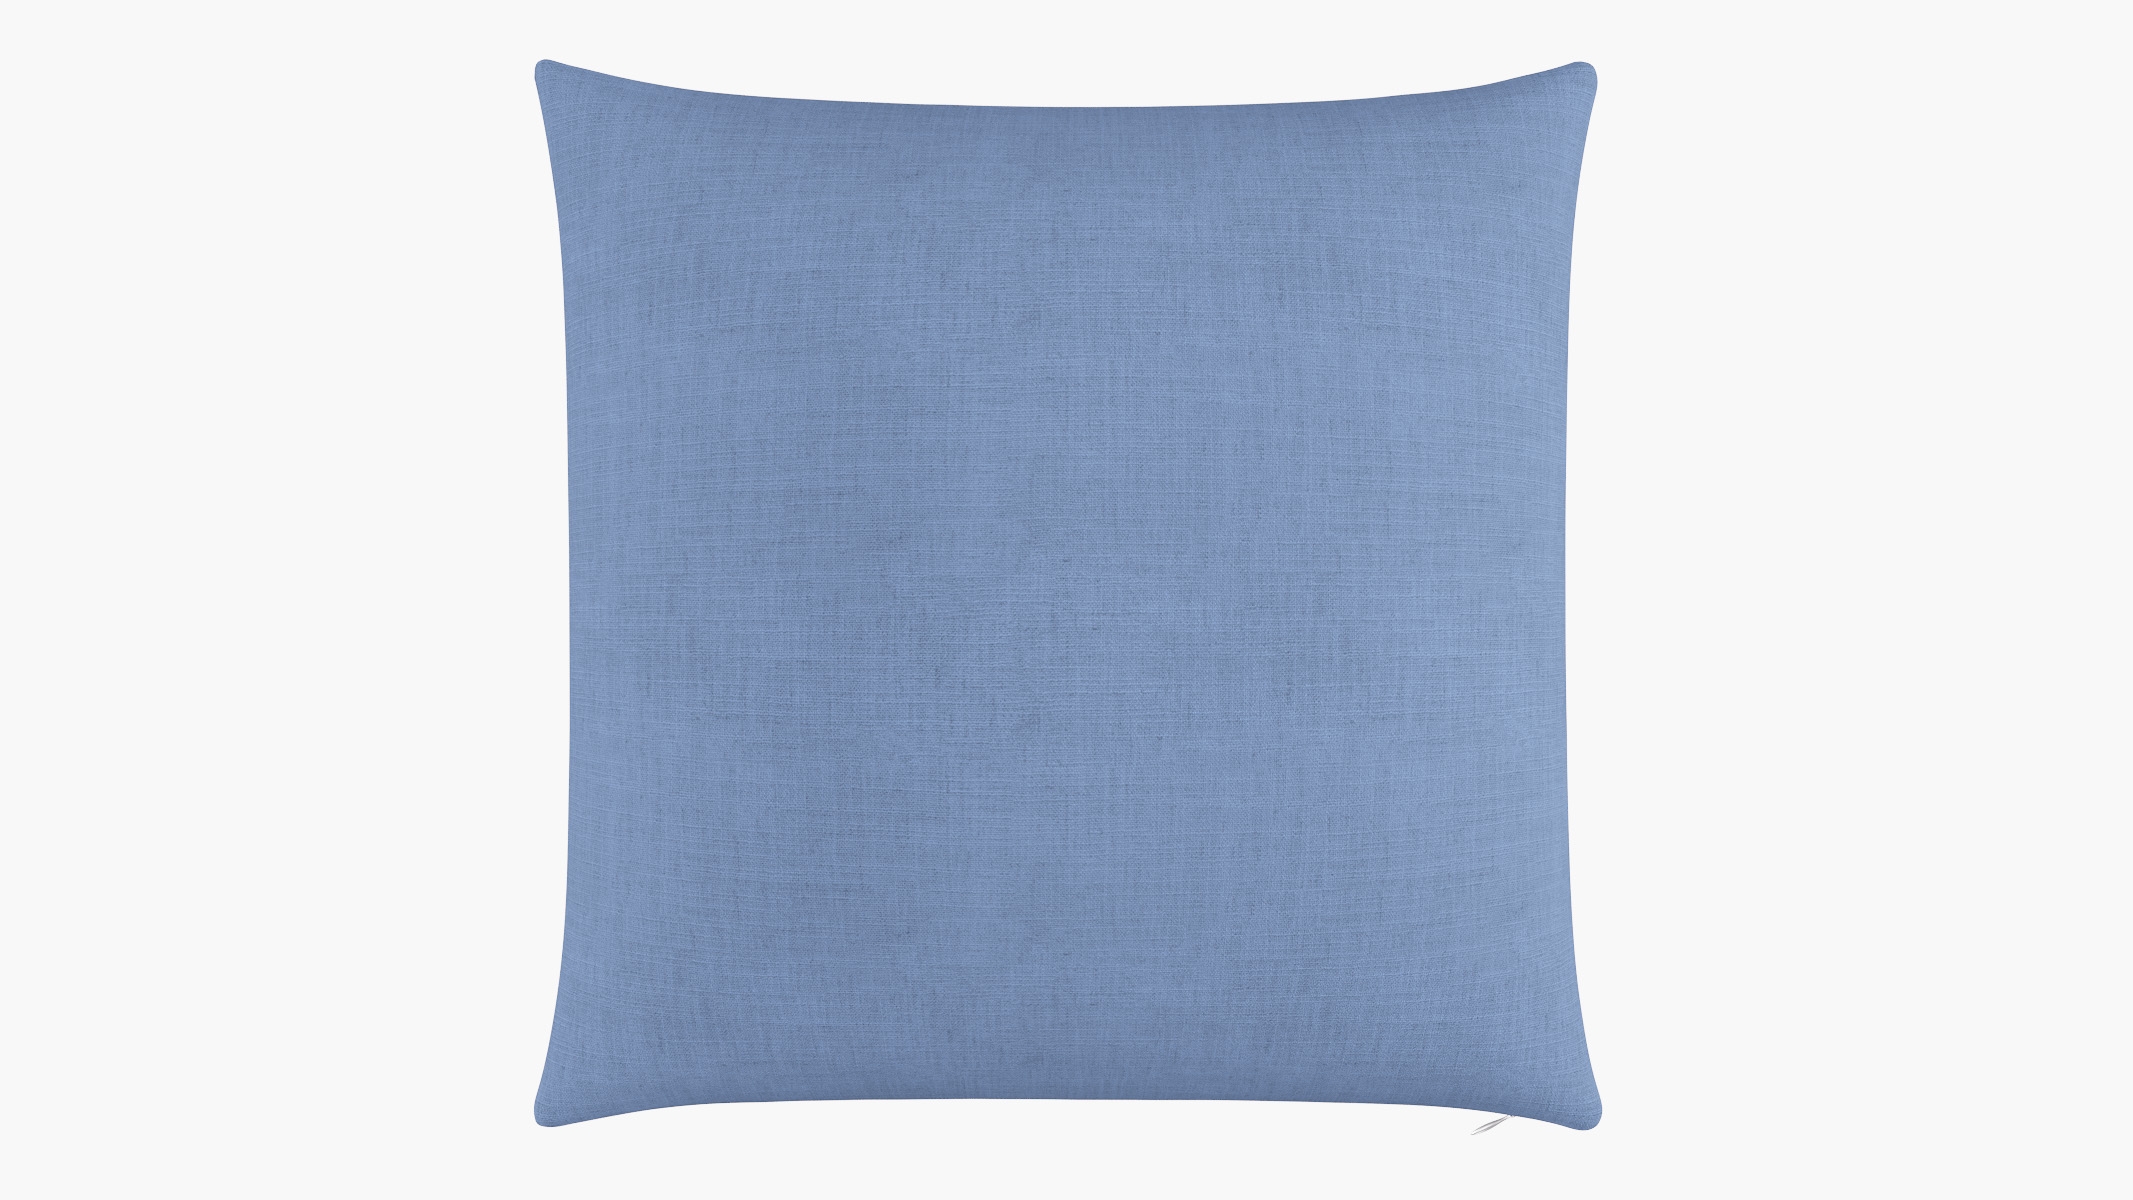 Throw Pillow 26", French Blue Linen, 26" x 26" - Image 0